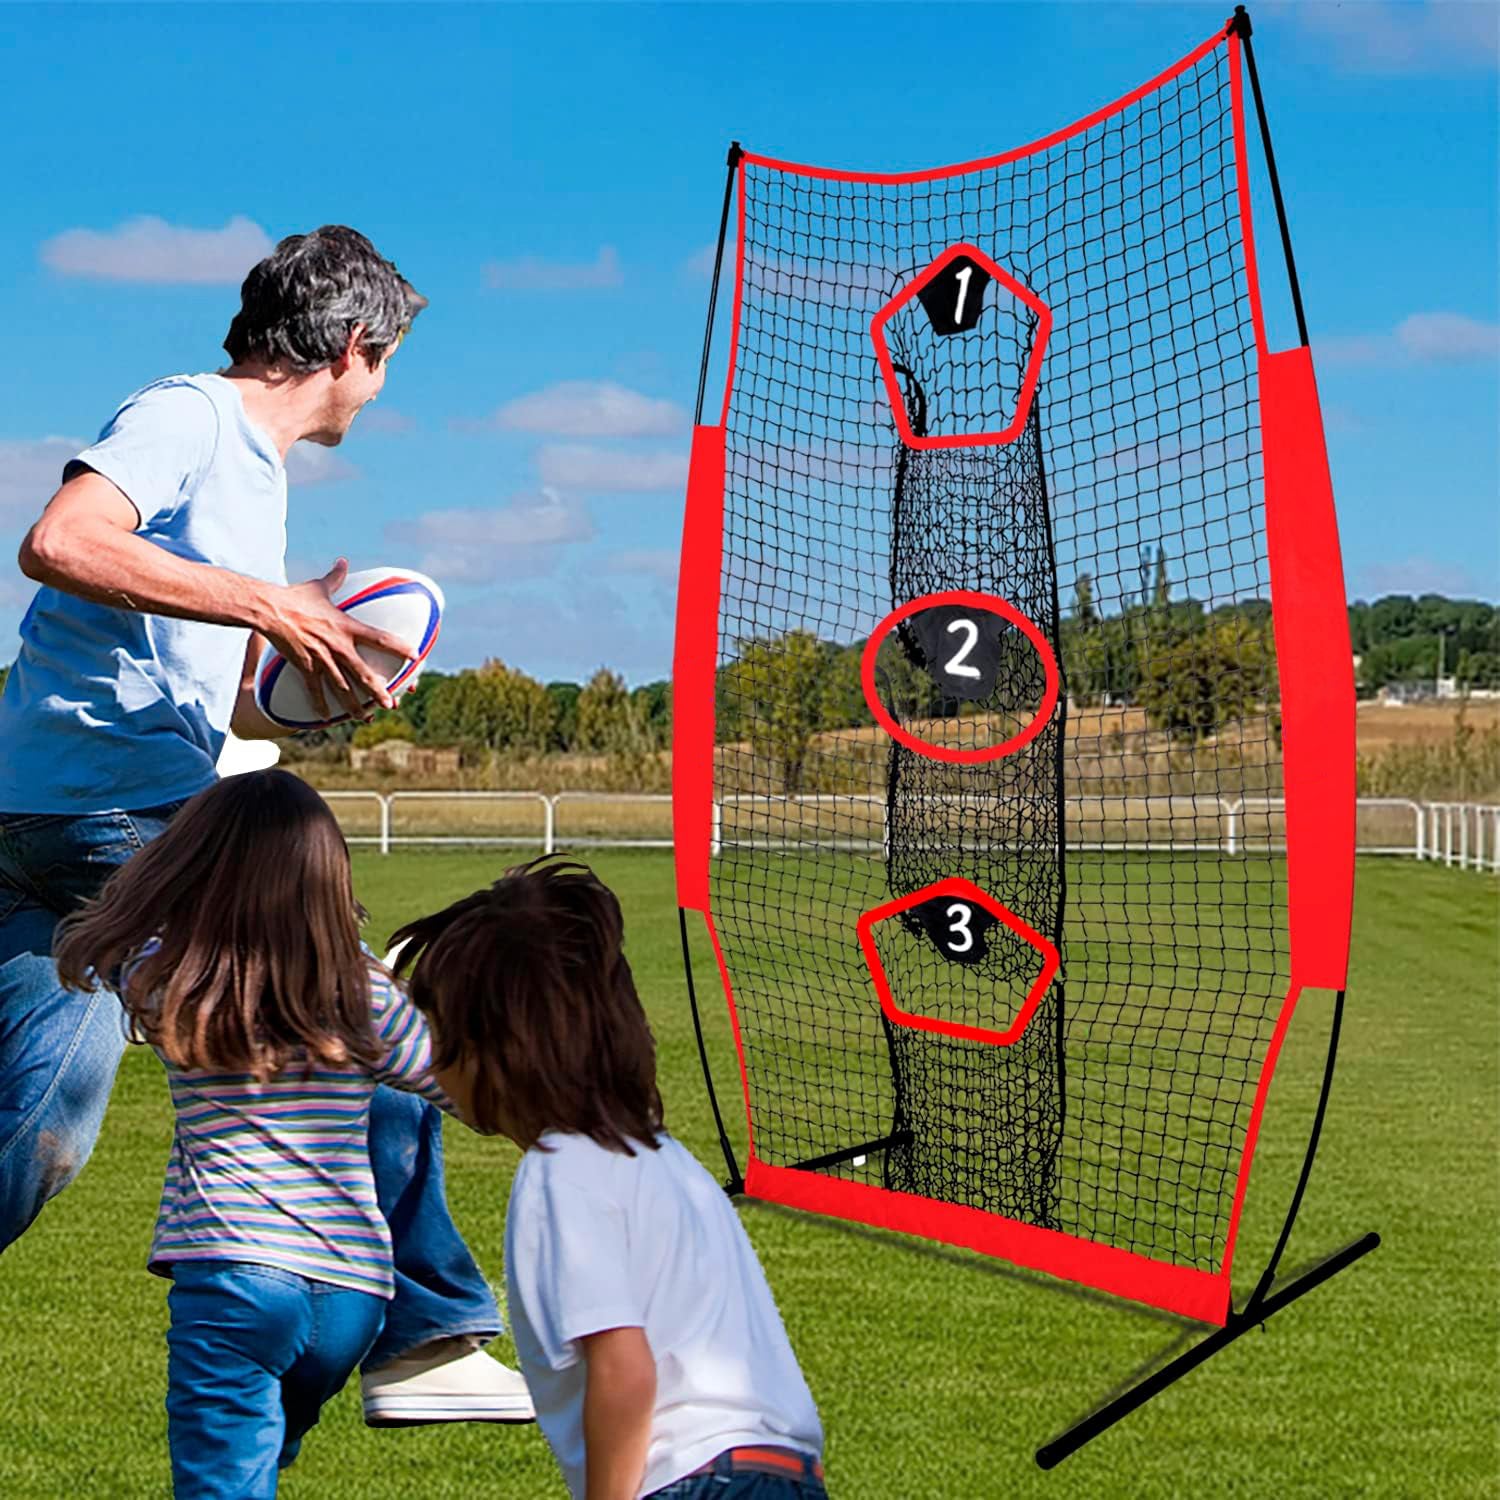 Football Throwing Net Football QB Net Football Training Target Net for Quarterback Throwing Accuracy, Football Nets for Passing Catching Snapping,Portabale,7x5FT